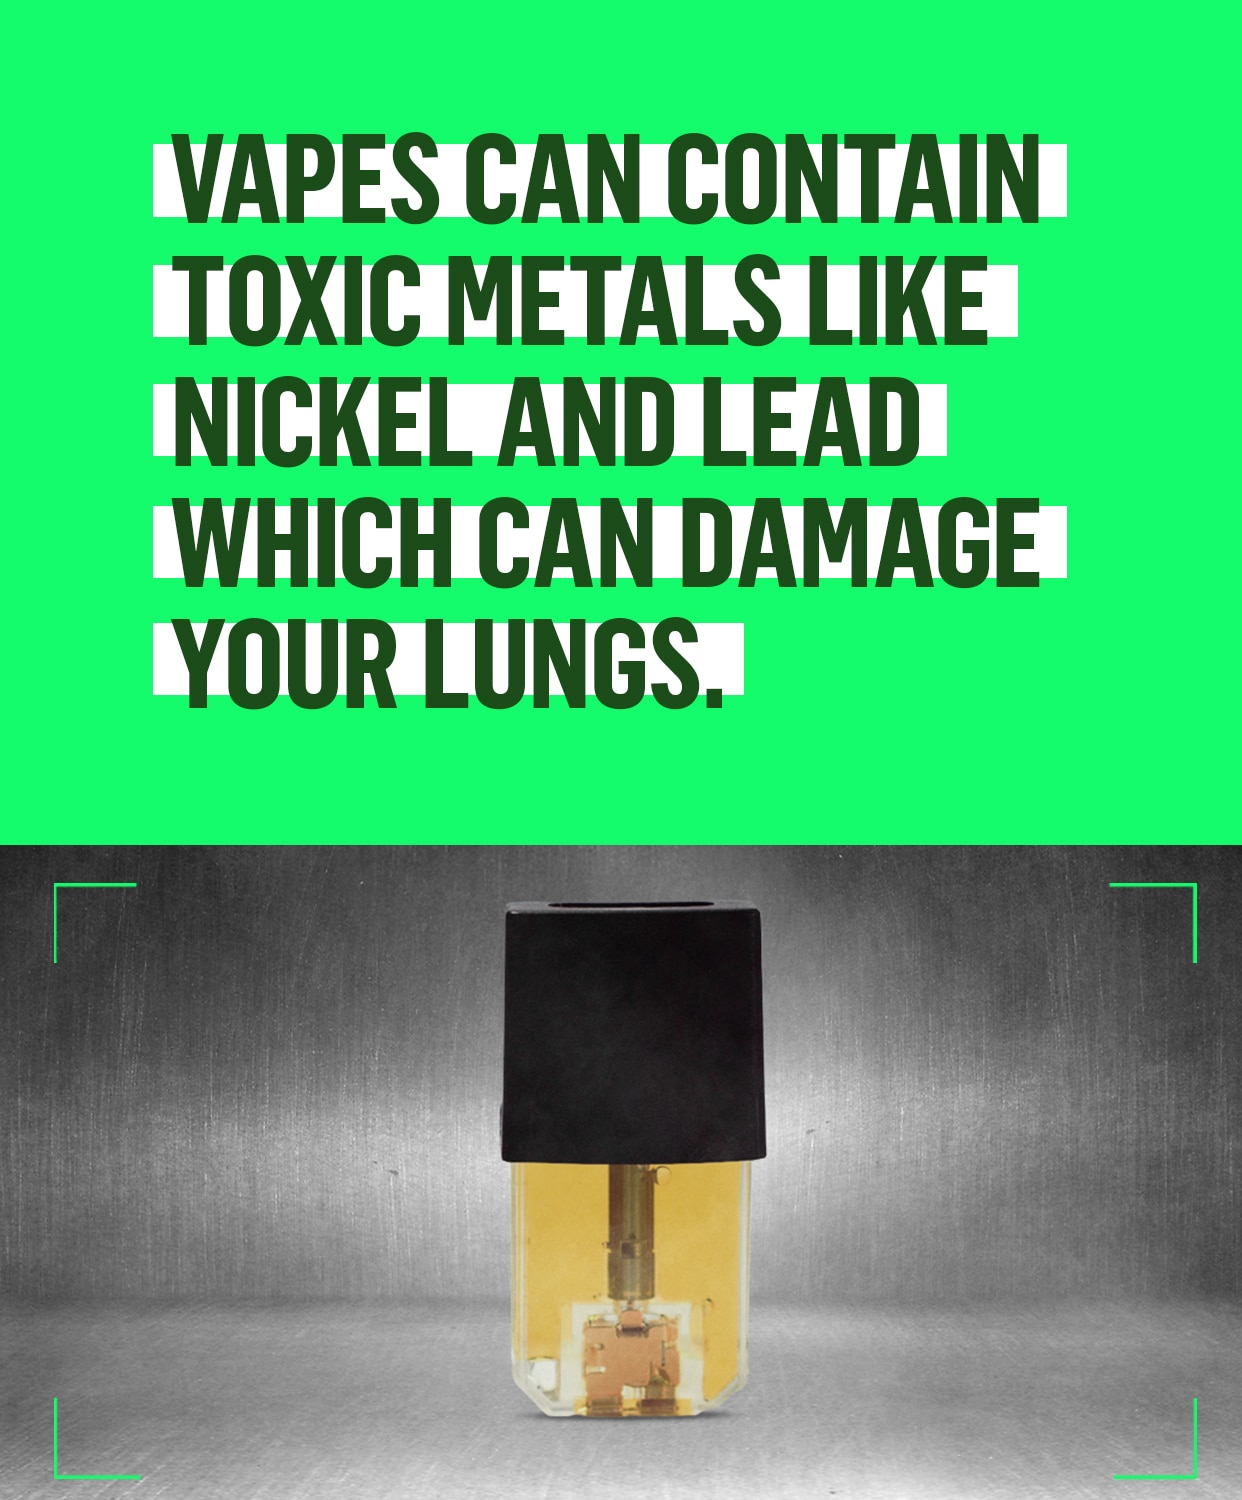 Vapes can contain toxic metals like nickel and lead which can damage your lungs